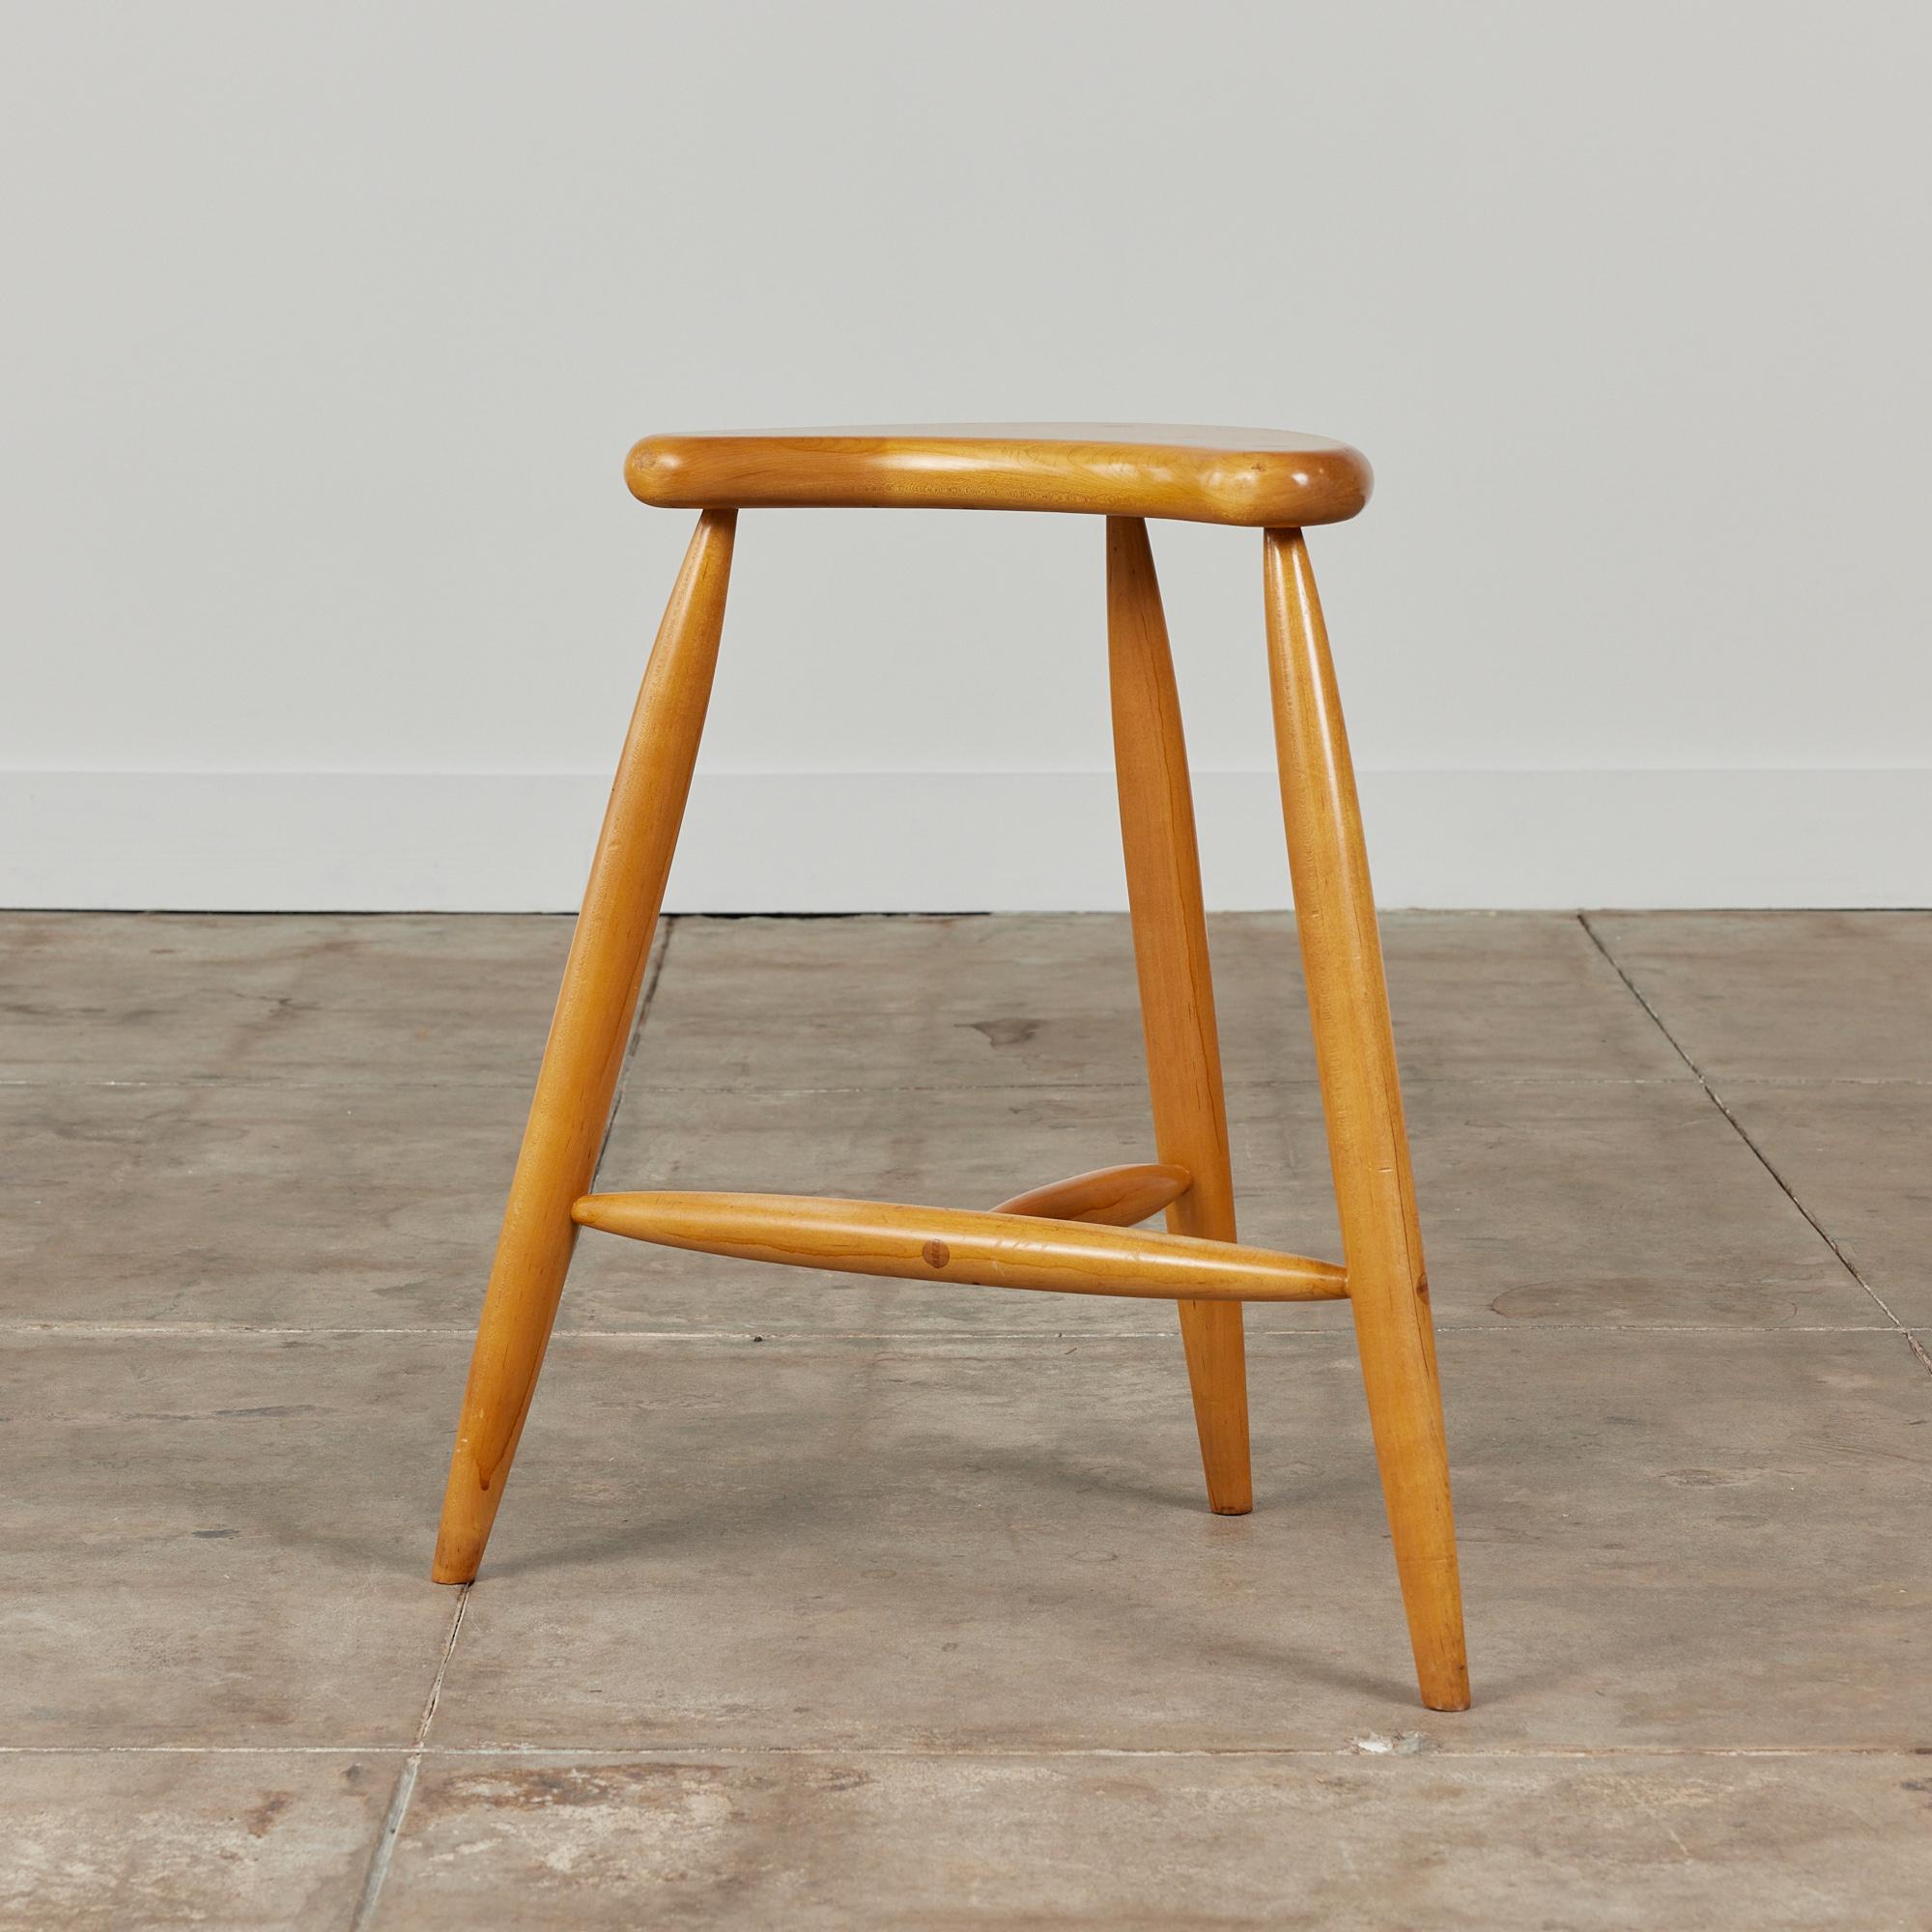 Studio craft stool made by P. Goodrich c.1995, Rhode Island. The maple stool showcases a minimalist design with a crescent seat with rounded edges. The stool is supported by three dowel legs with stretchers.

Signed P. Goodrich -